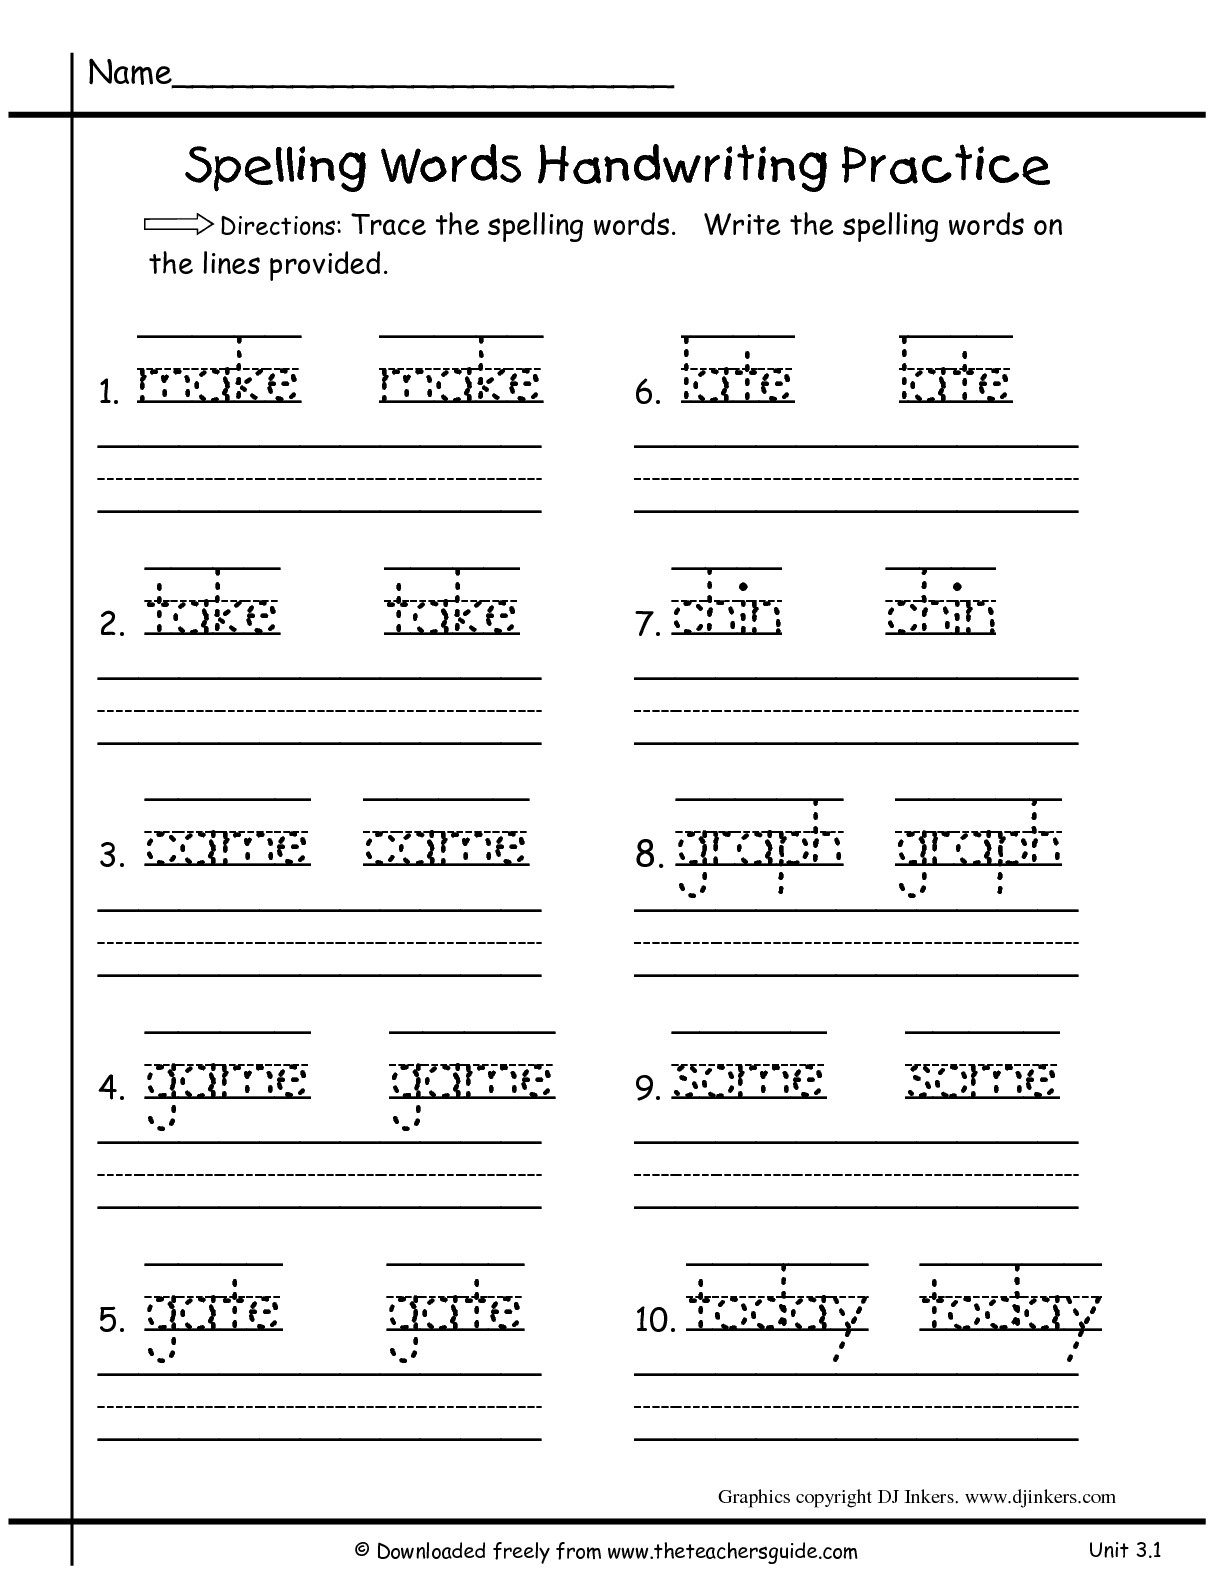 Printable Writing Sheets For First Graders - 6.14.hus-Noorderpad.de • - Free Printable Handwriting Paper For First Grade